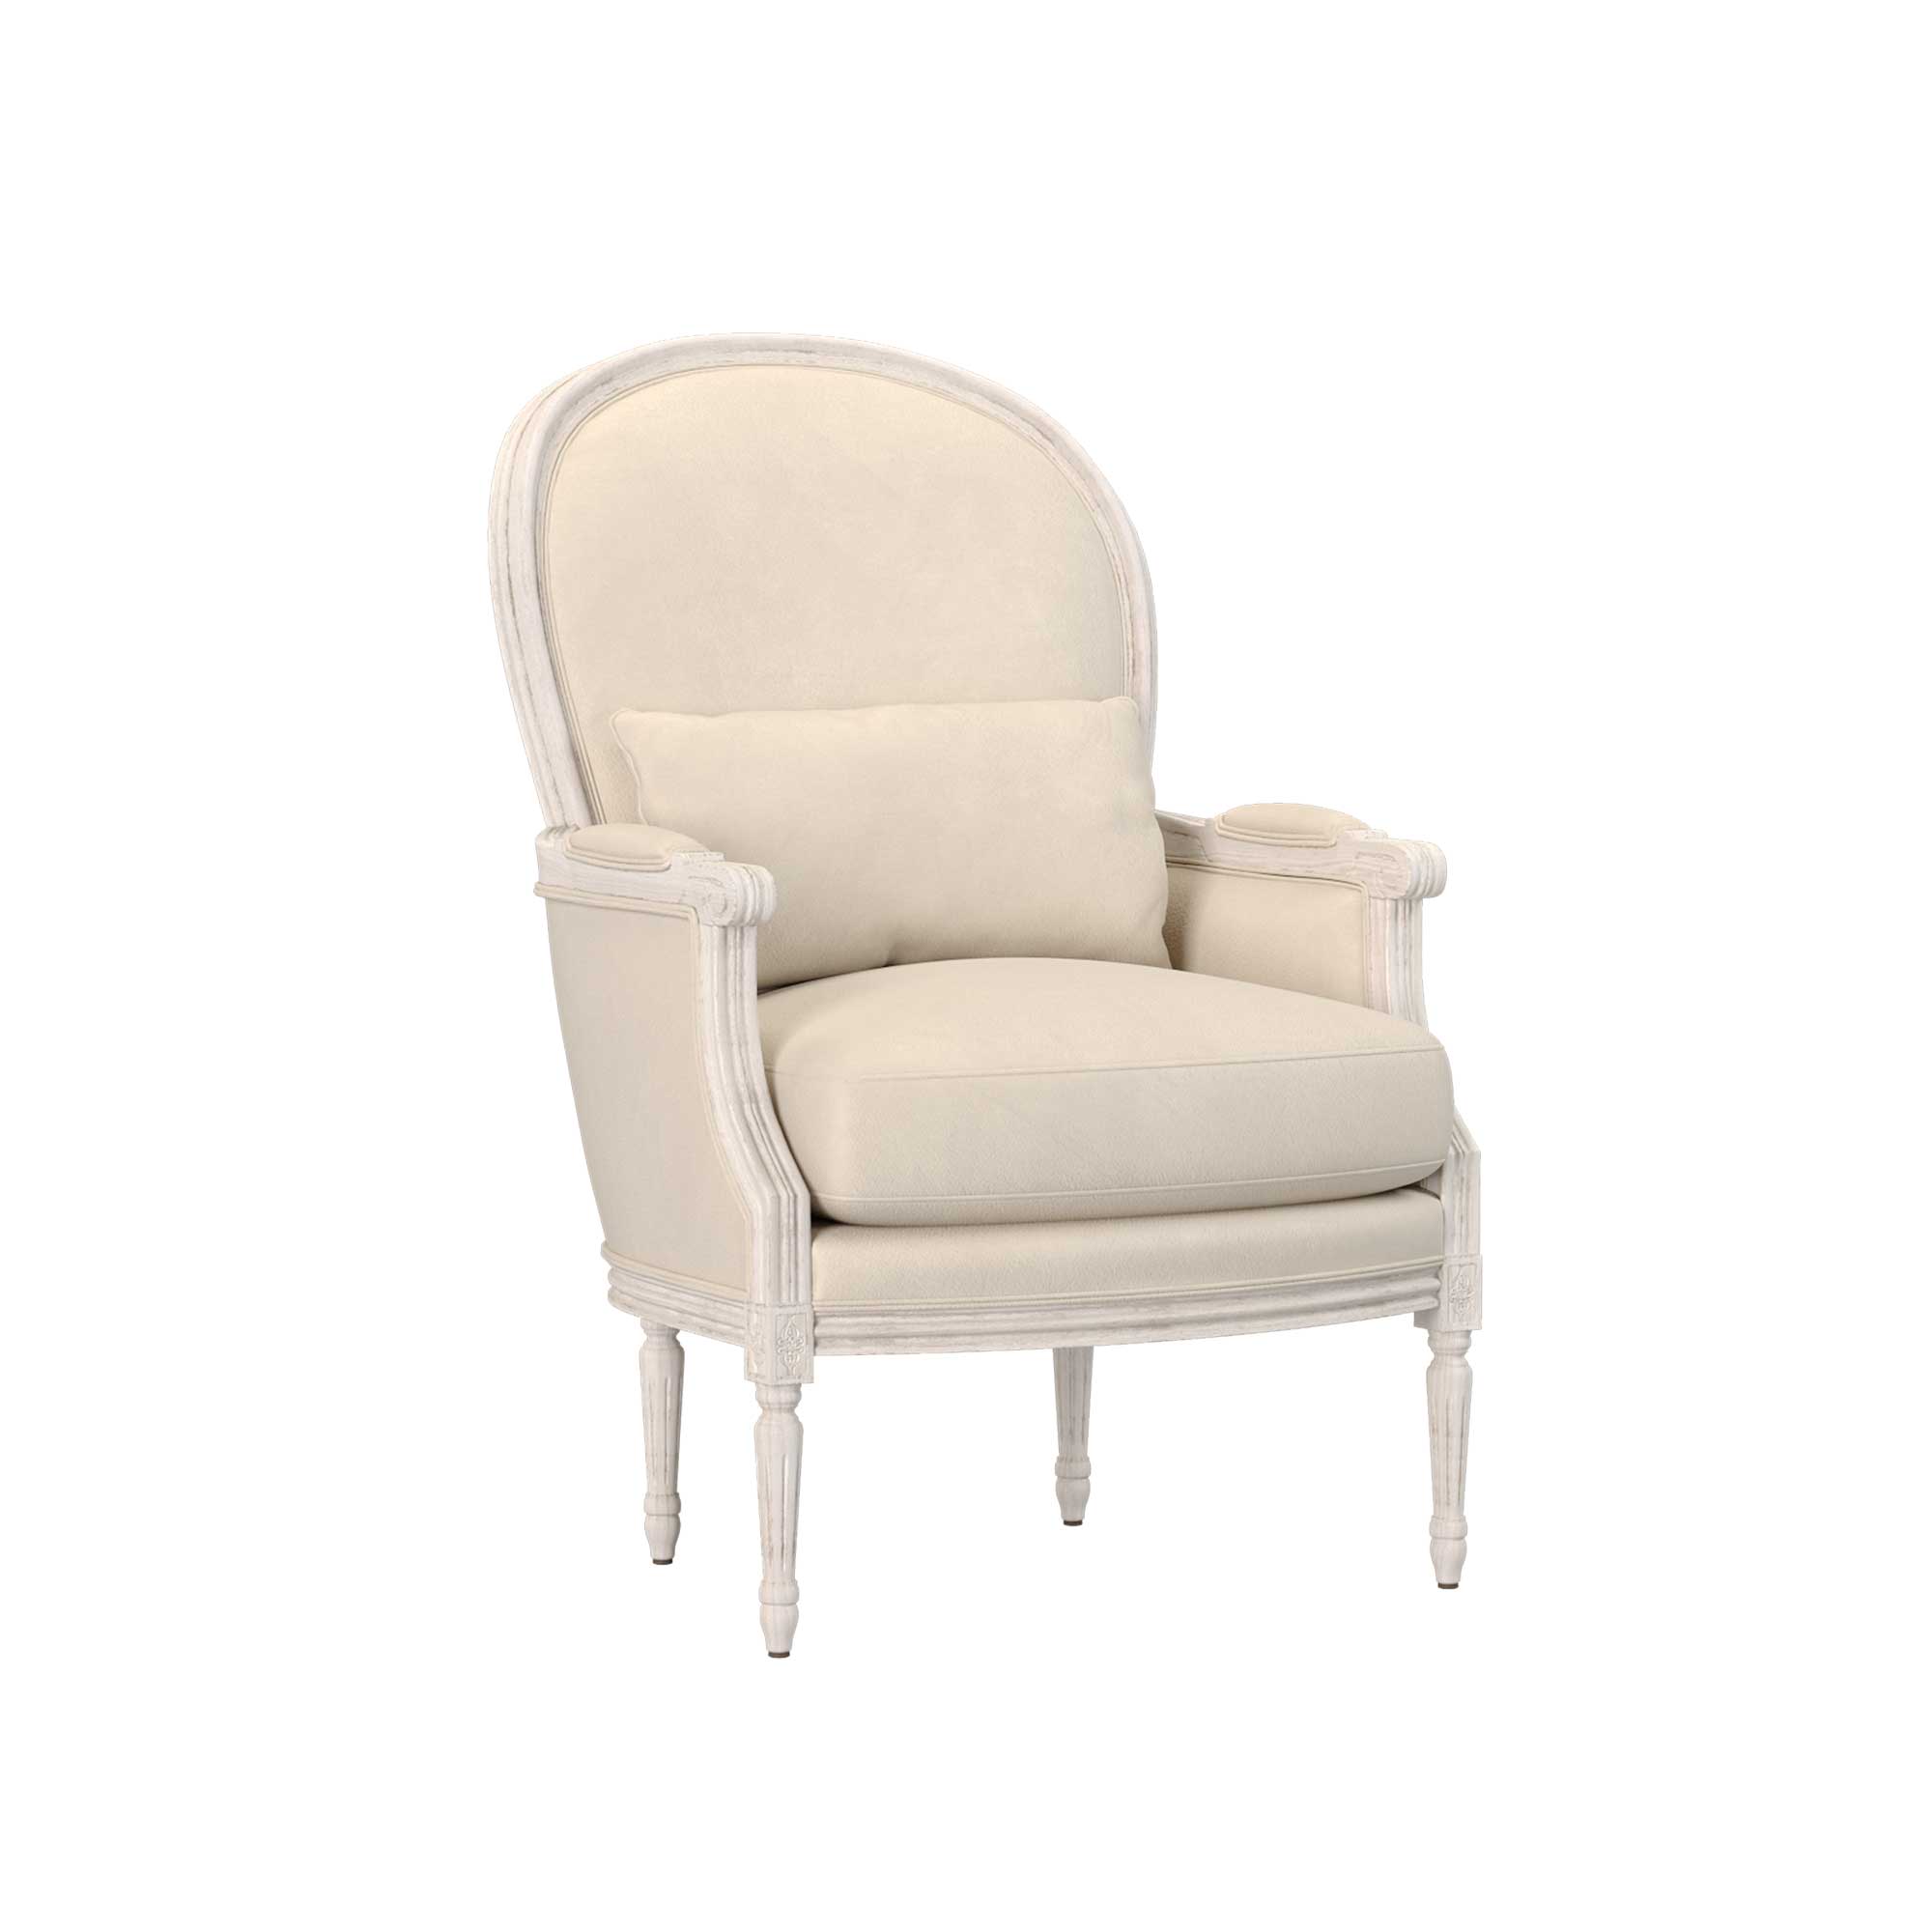 Adele Neutral Lounge Chair in White